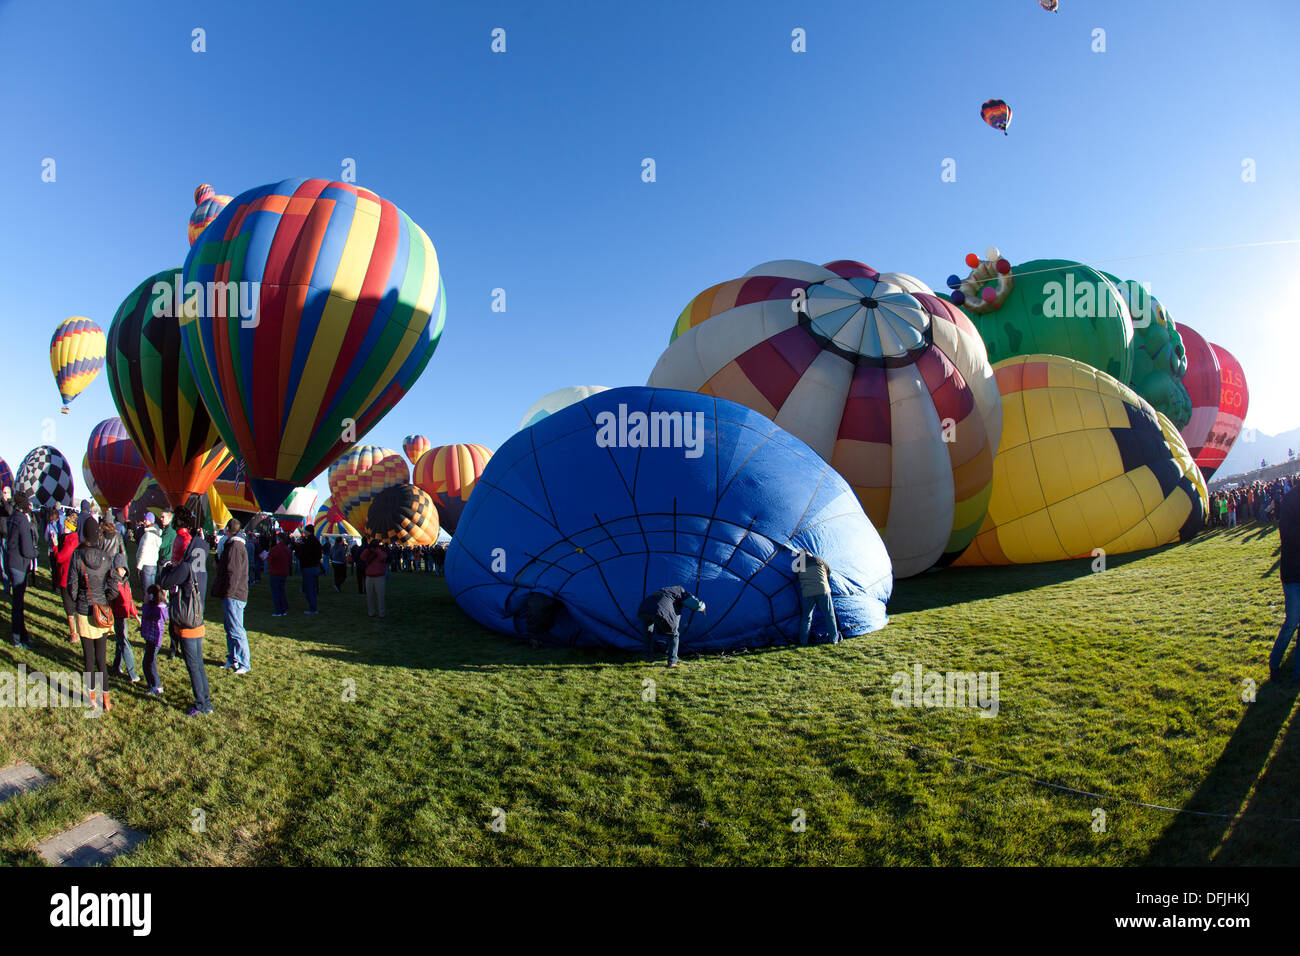 Albuquerque, NM, USA. 5th Oct, 2013. . Hot air balloons being inflated on a field, First day of mass ascension at Albuquerque International Balloon Fiesta on Saturday October 5, 2013. Albuquerque, New Mexico, USA. Credit:  Christina Kennedy/Alamy Live News Stock Photo